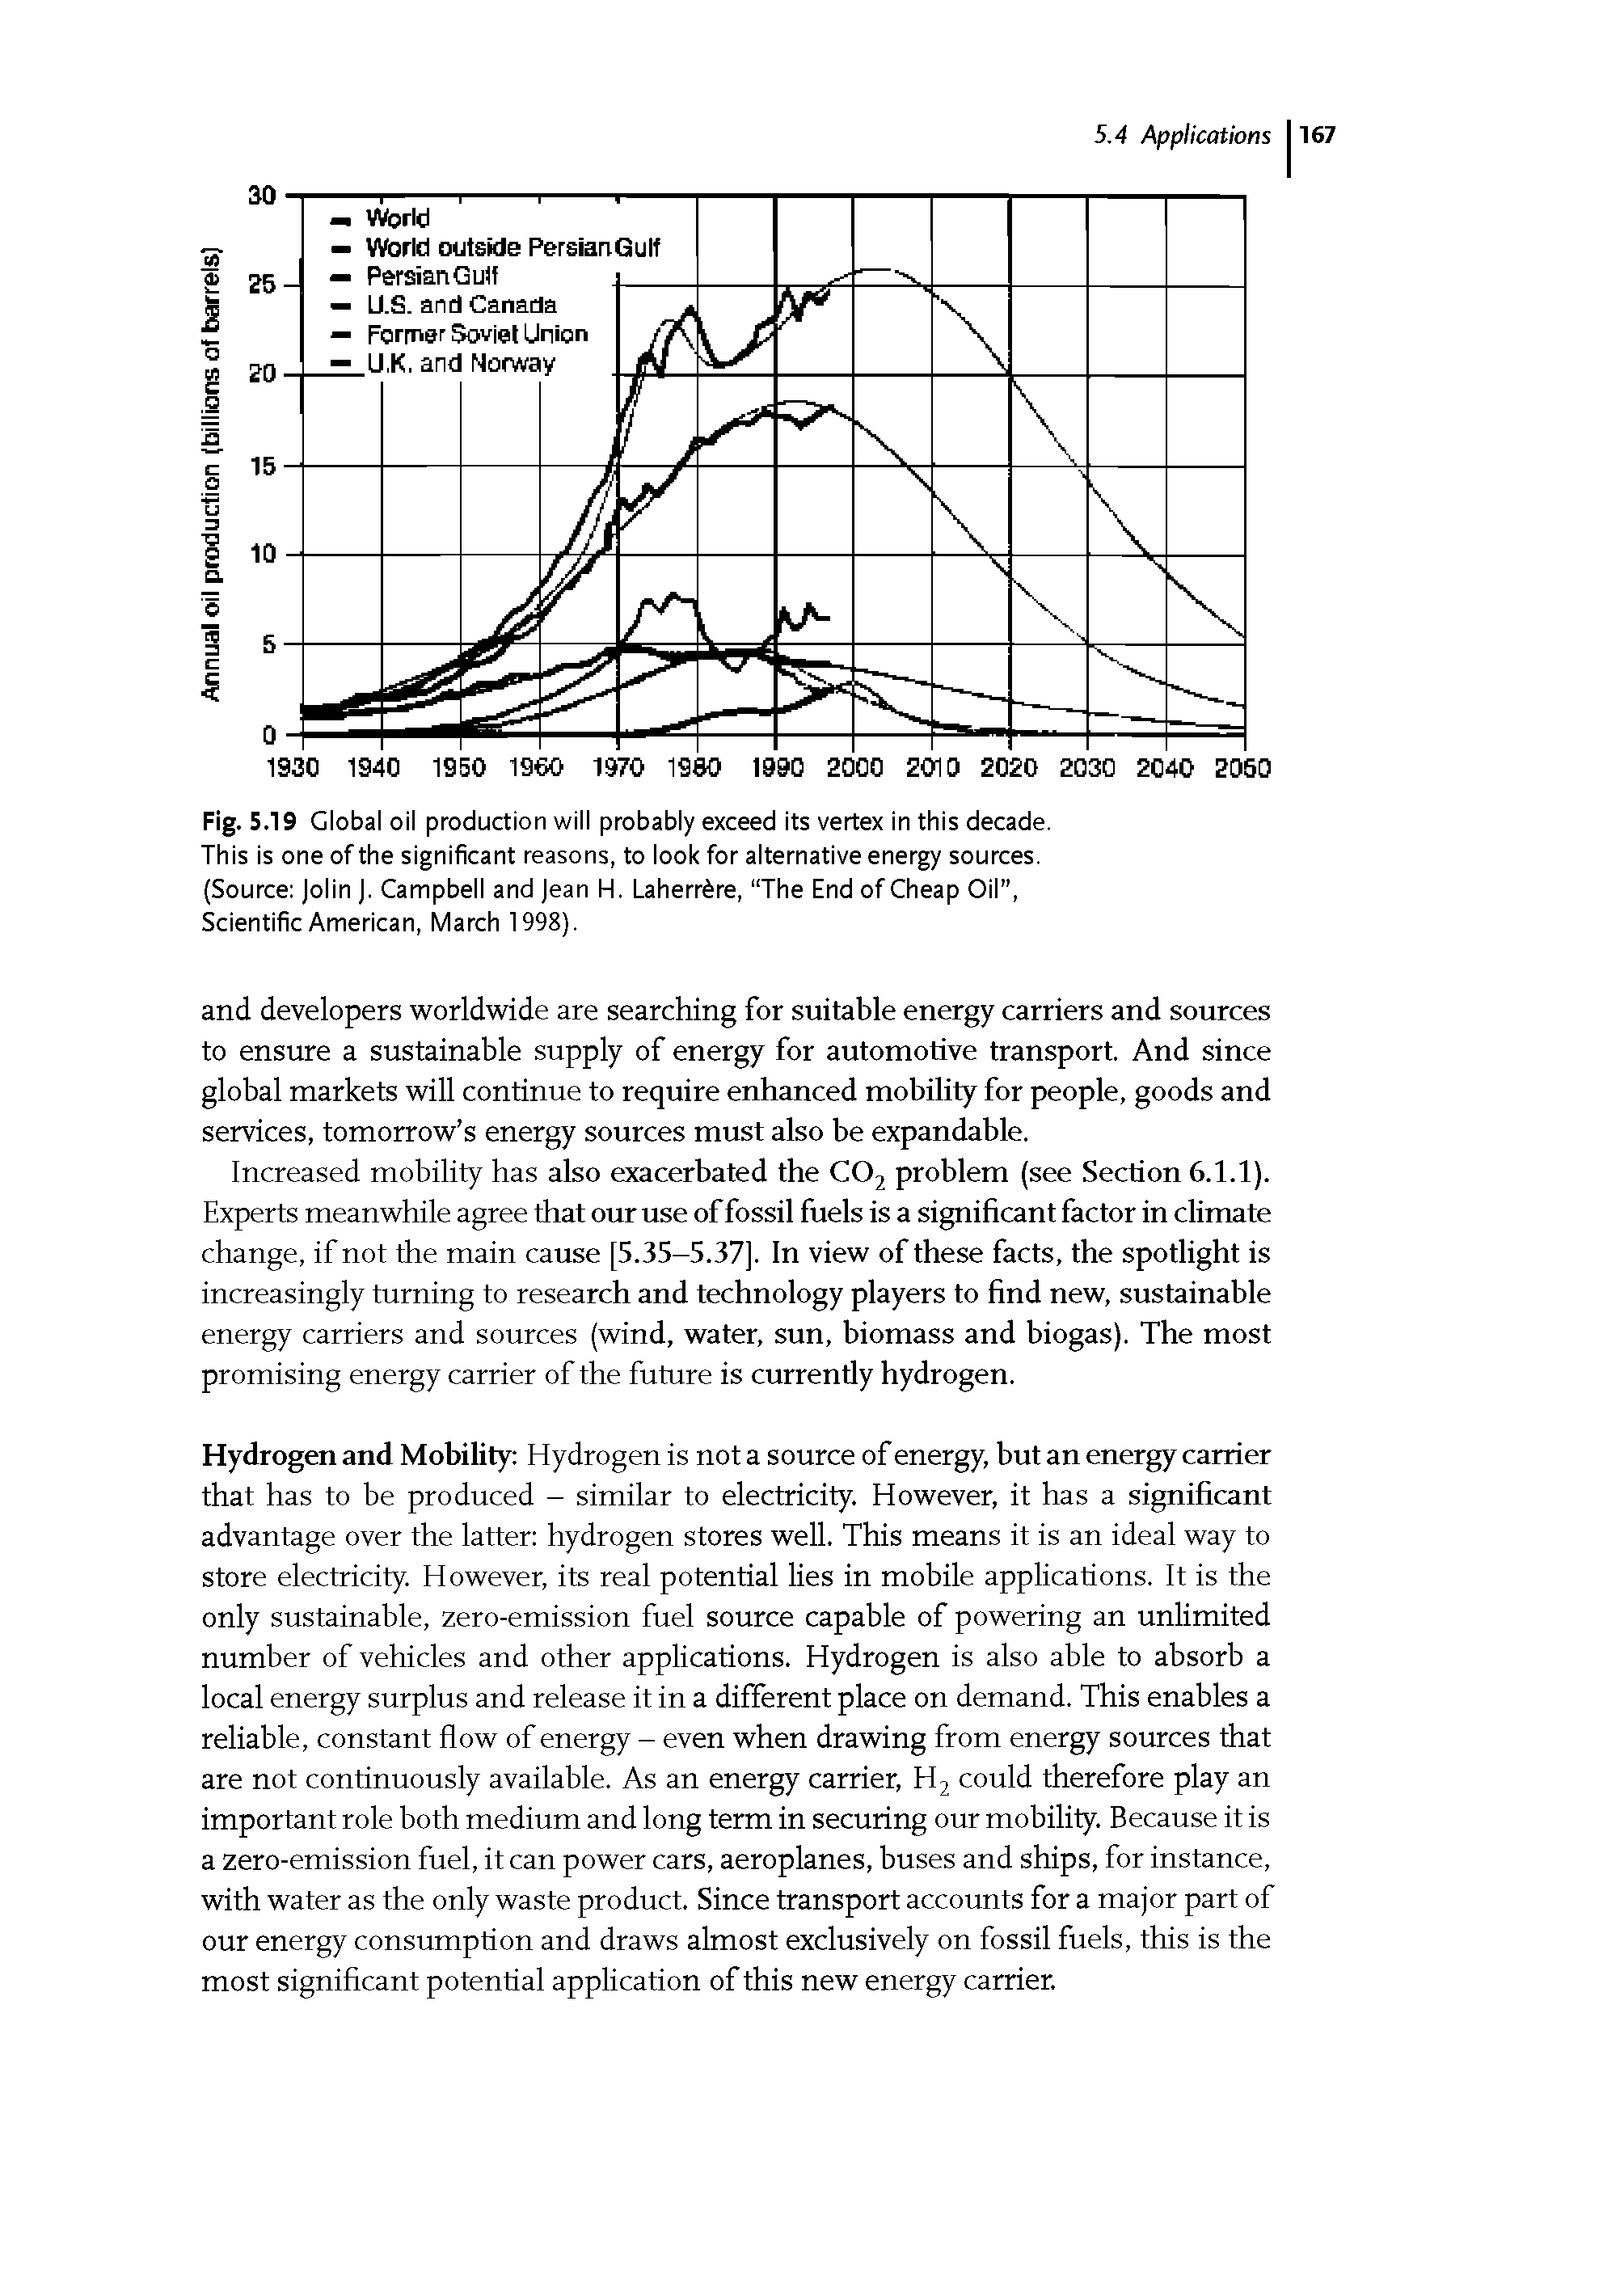 Fig. 5.19 Global oil production will probably exceed its vertex in this decade. This is one of the significant reasons, to look for alternative energy sources. (Source John J. Campbell and Jean H. Laherr re, The End of Cheap Oil , Scientific American, March 1998).